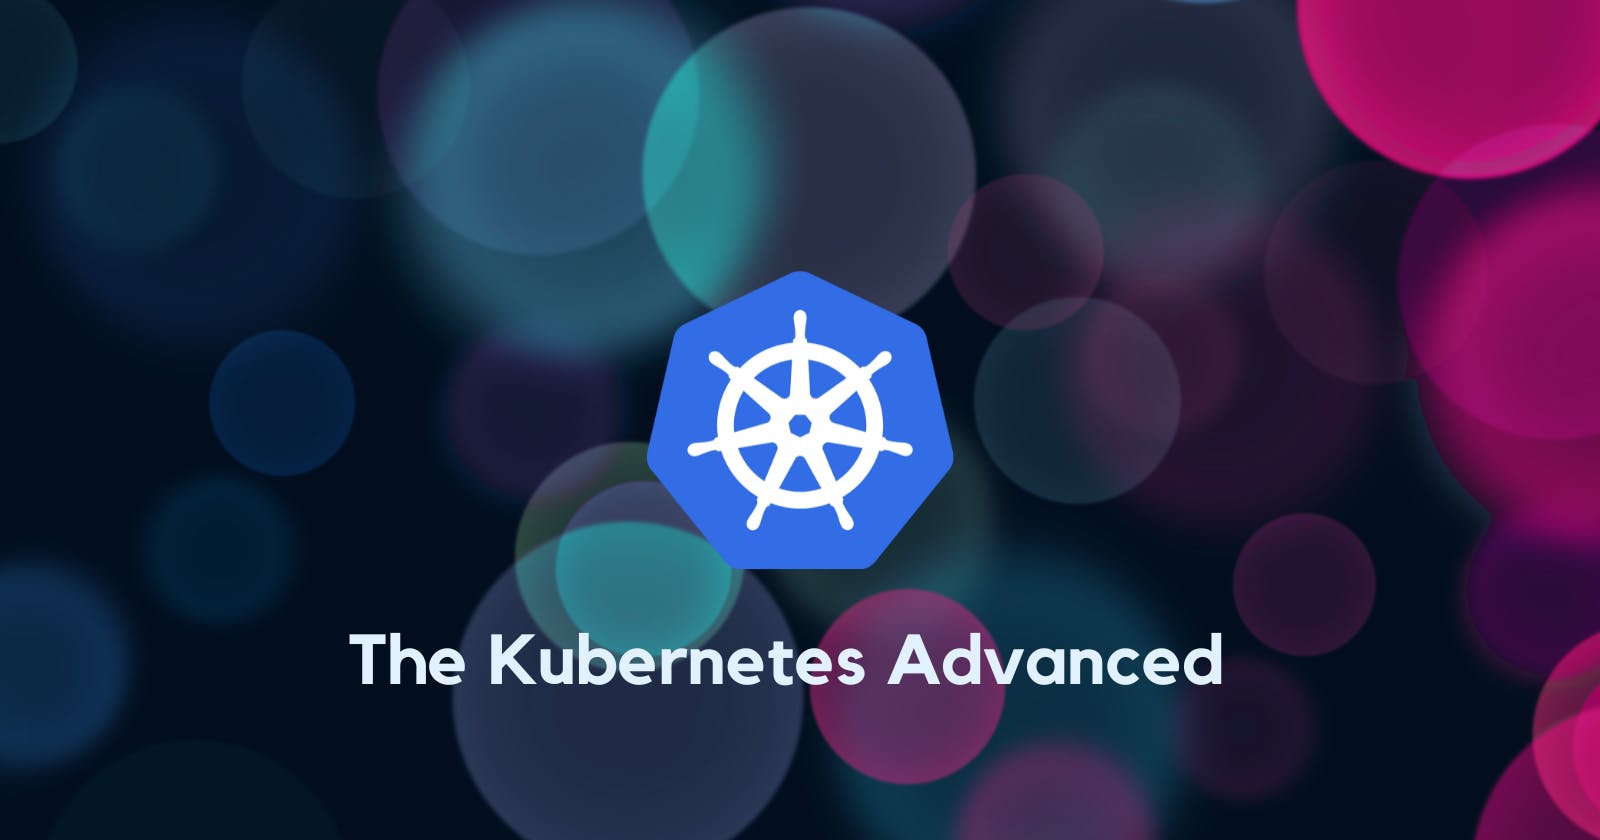 Here are some advanced topics related to Kubernetes that you should know about